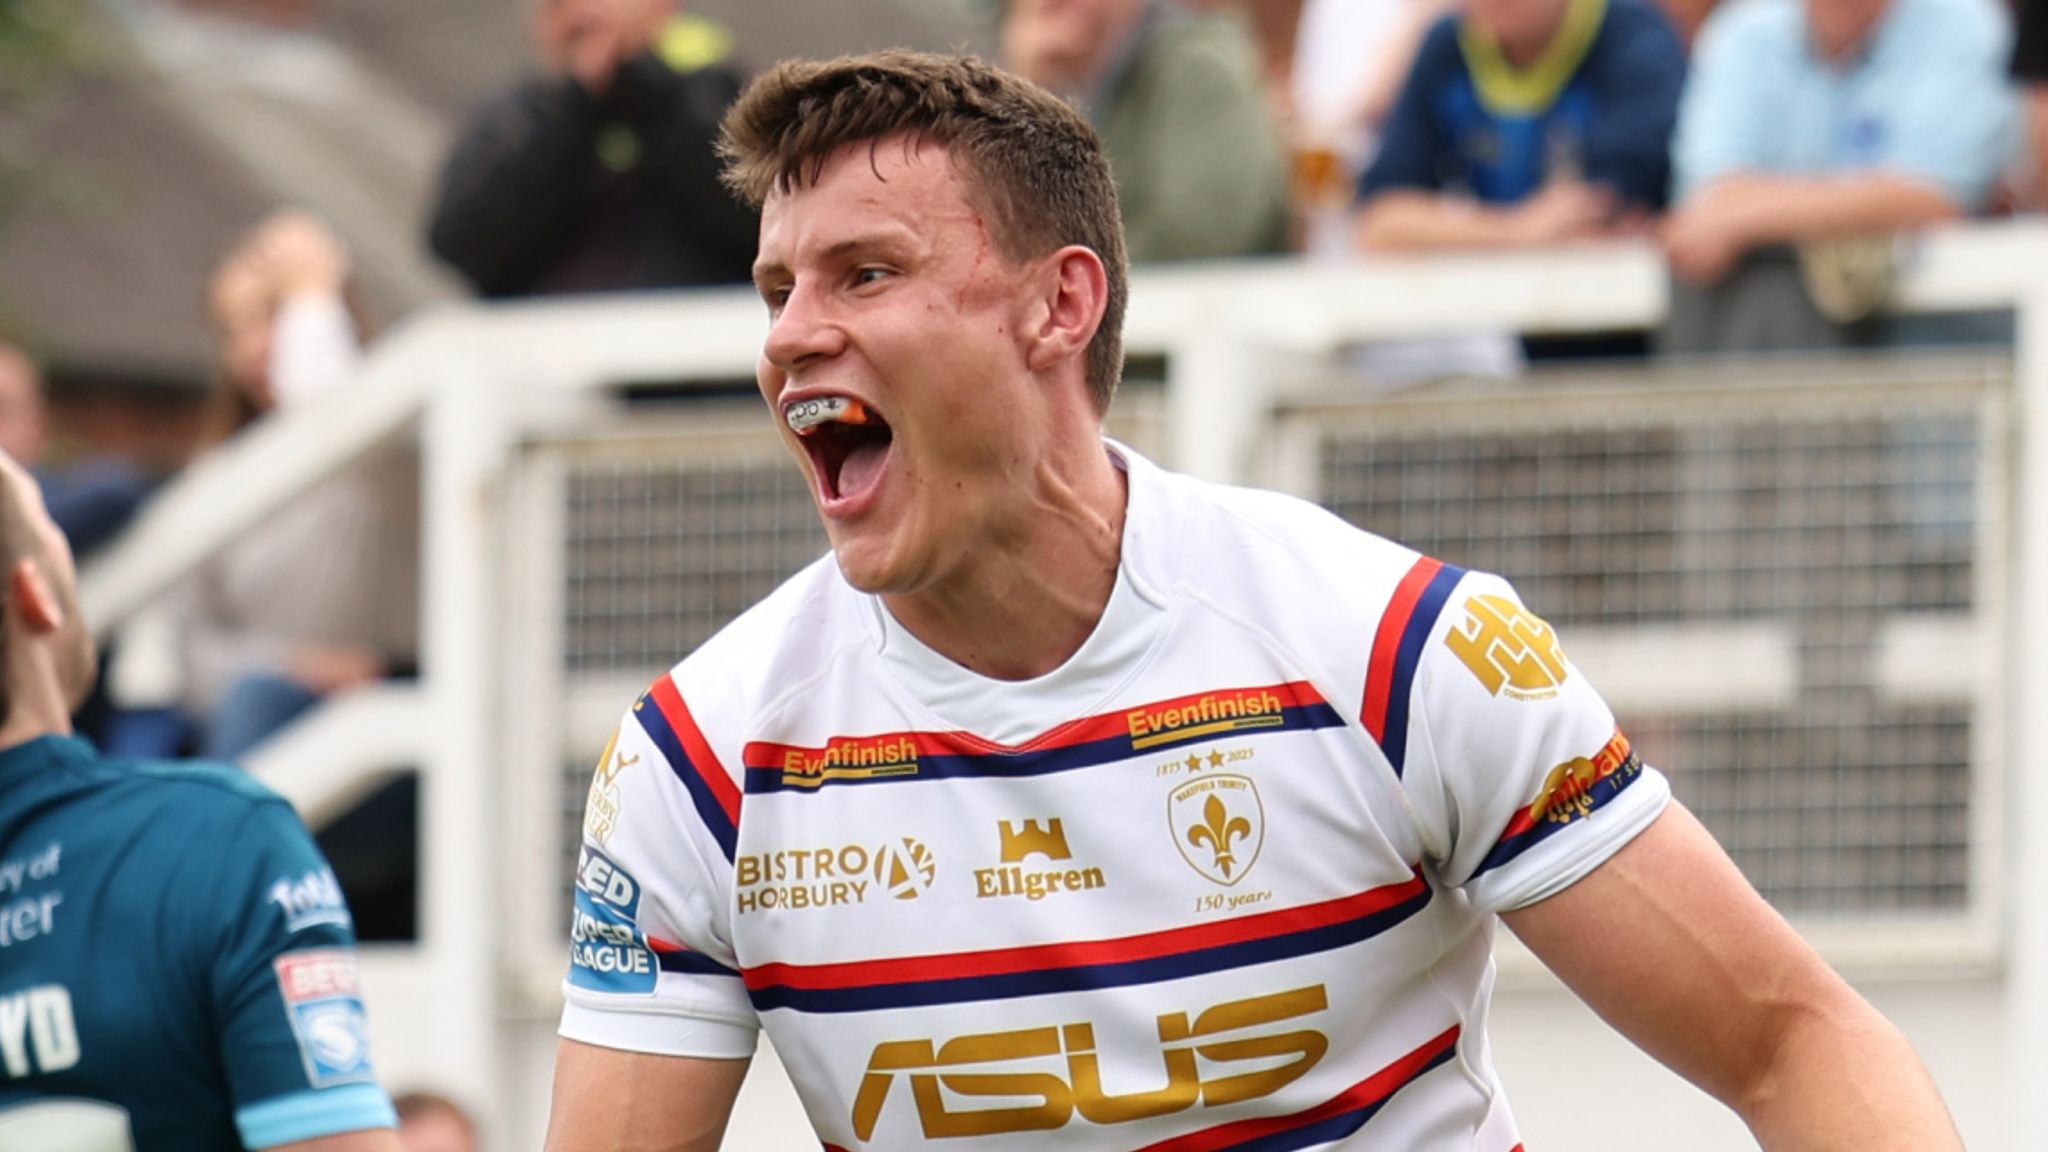 Wakefield 42-6 Warrington Trinity overwhelm Wolves to continue battle for Super League survival Rugby League News Sky Sports